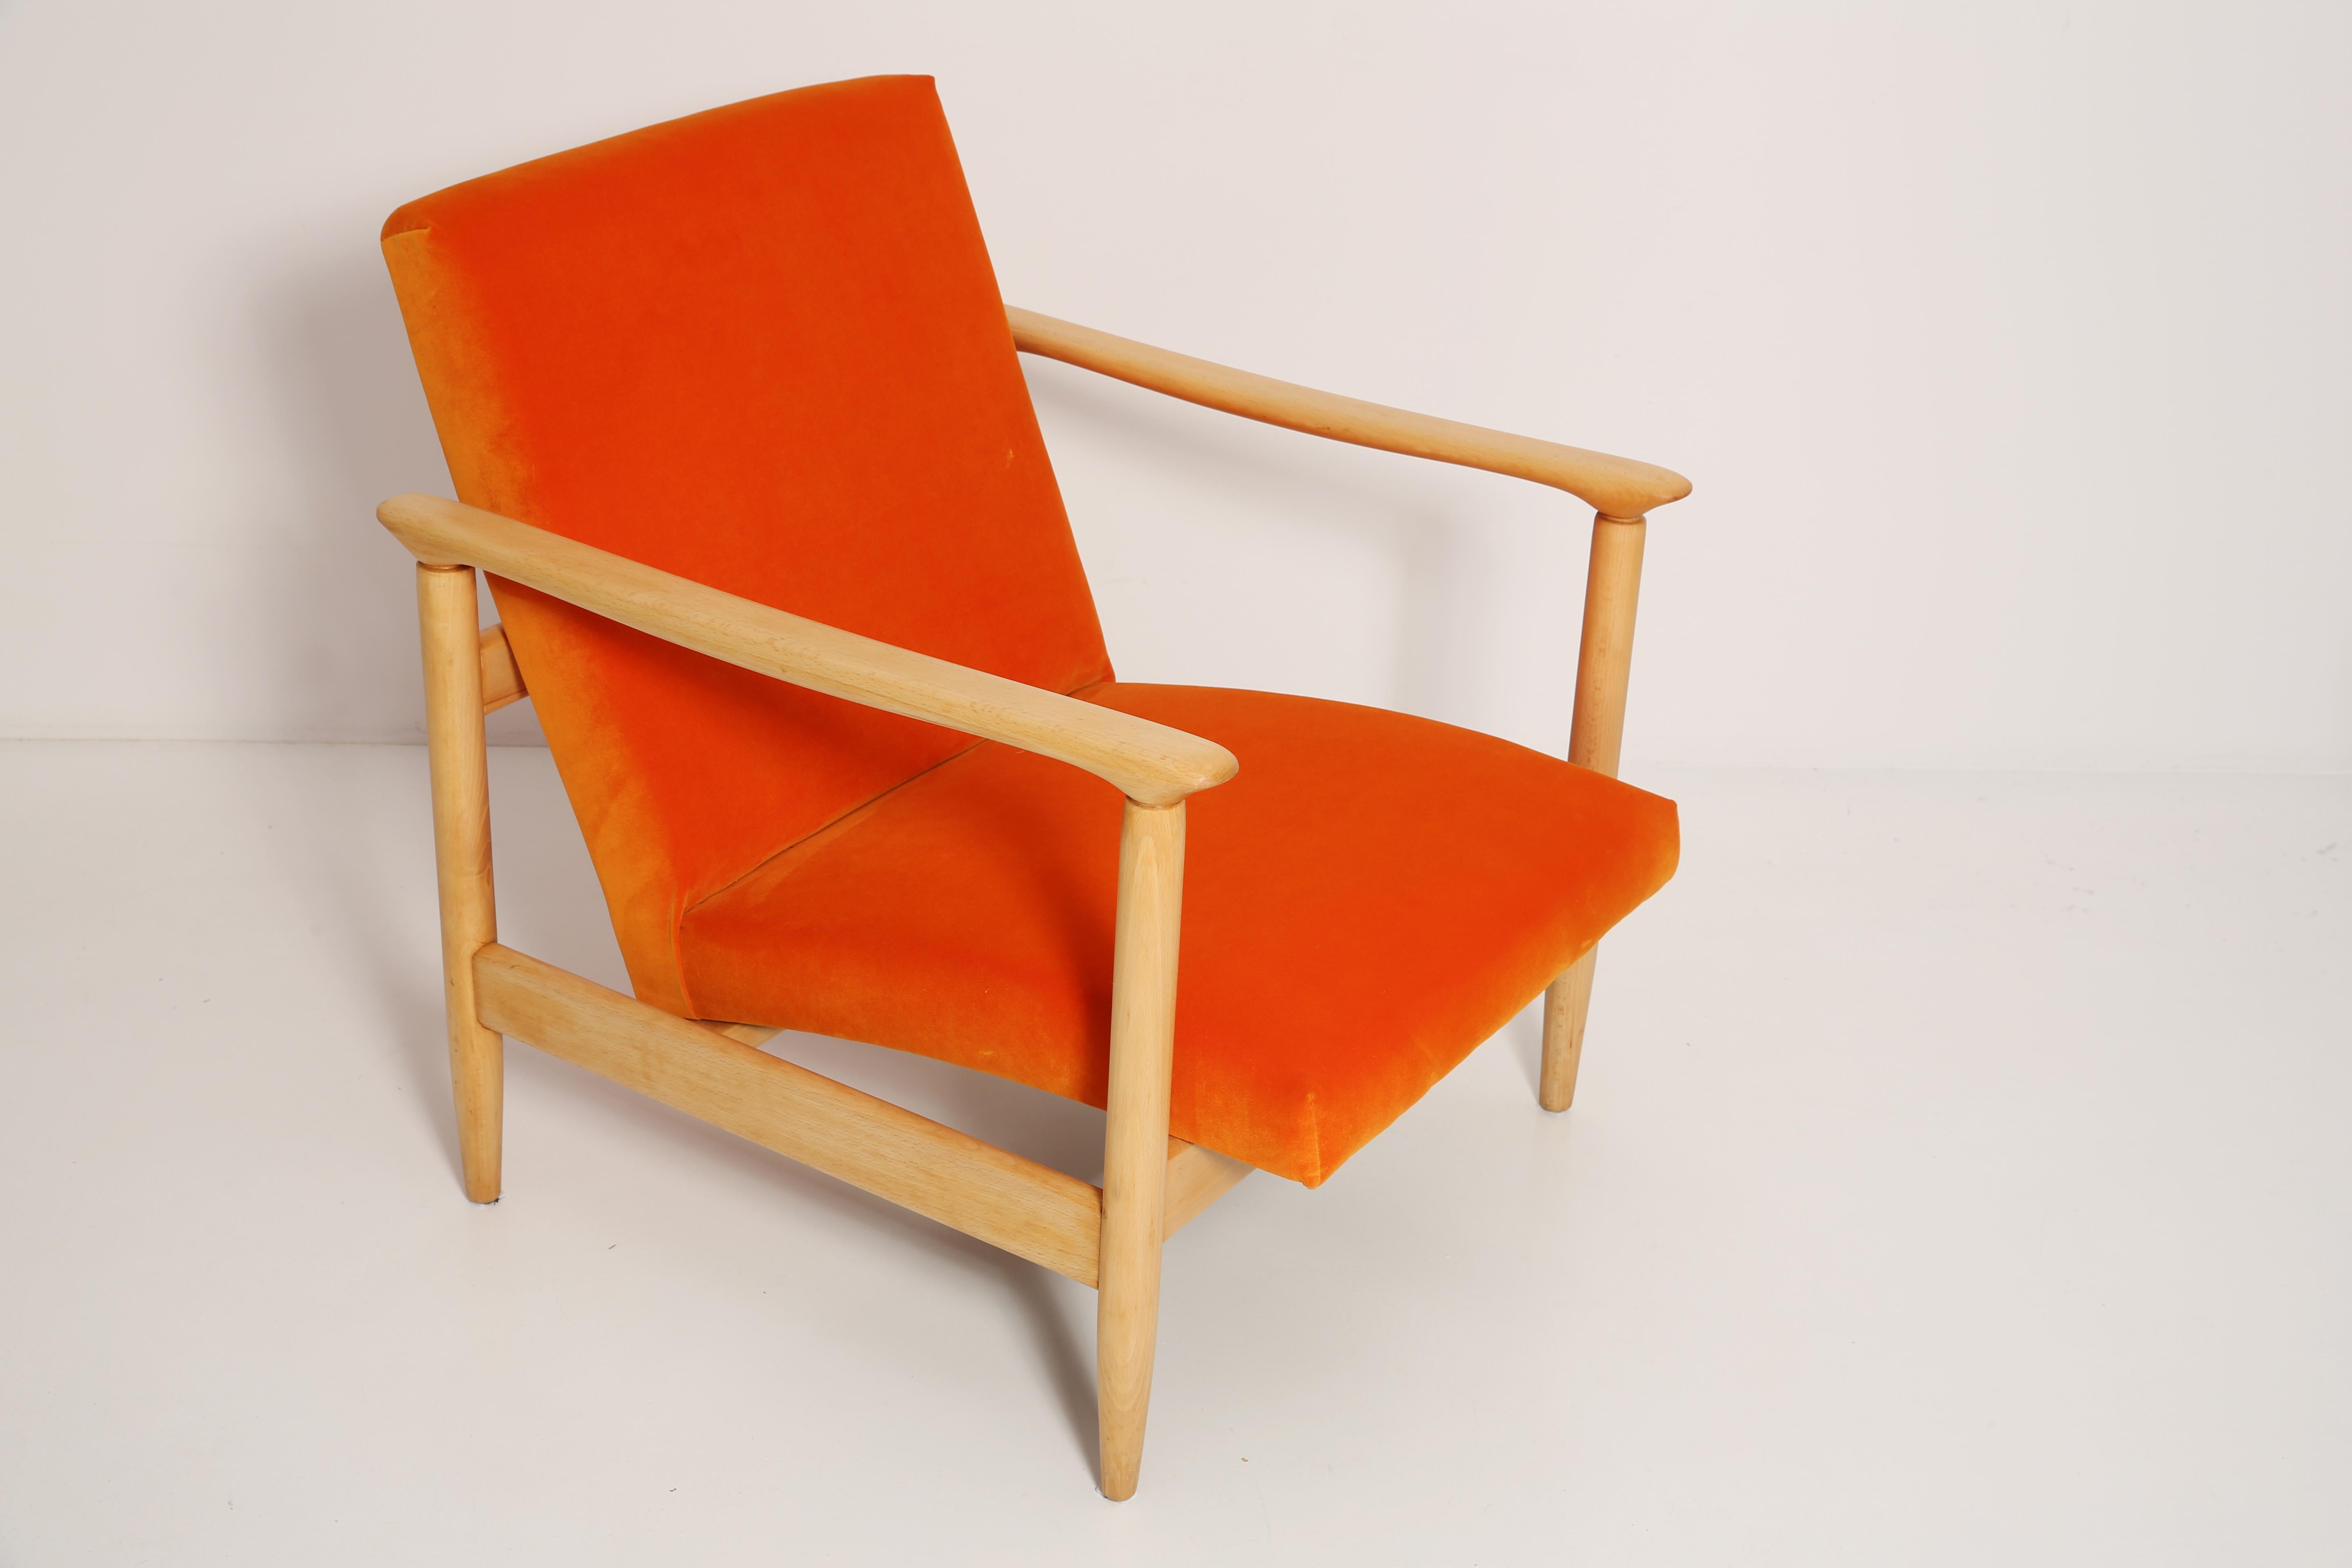 Beautiful bright orange velvet Armchairs GFM-142, designed by Edmund Homa, a polish architect, designer of Industrial Design and interior architecture, professor at the Academy of Fine Arts in Gdansk. 

The armchairs was made in the 1960s in the